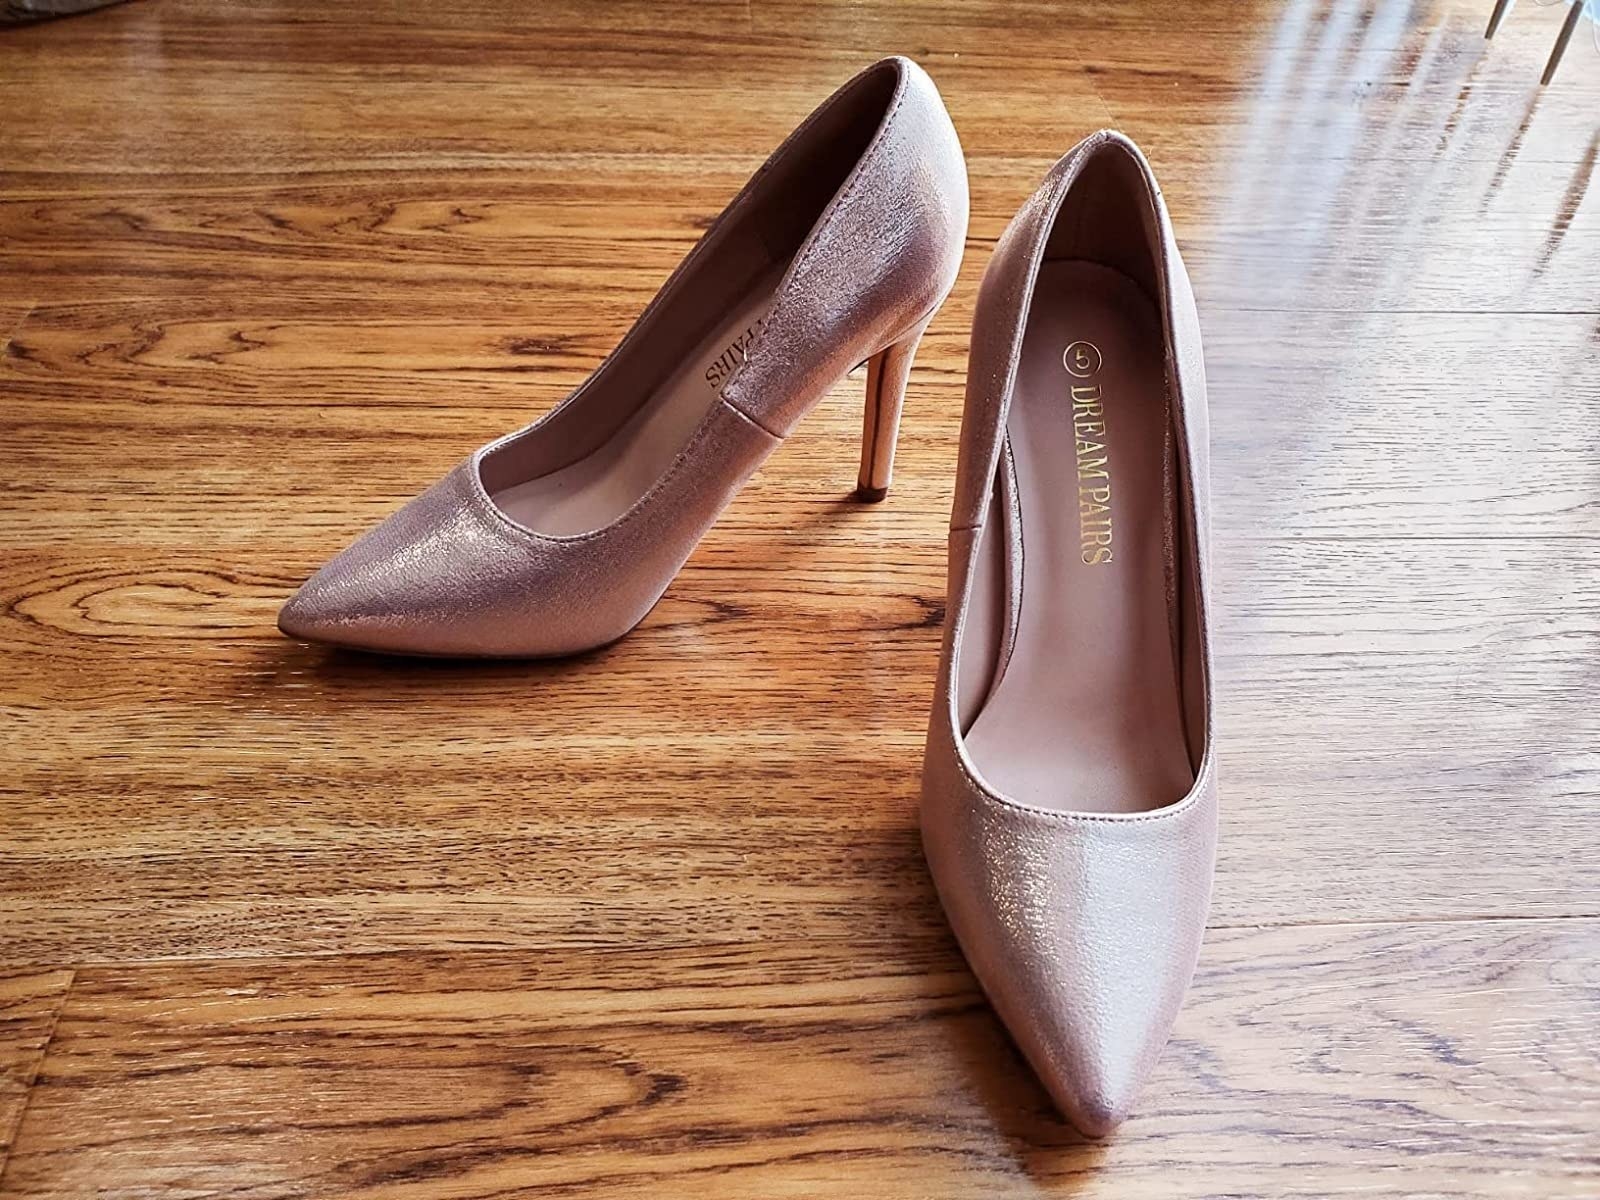 25 Pairs Of Heels That Reviewers Say Are Actually Comfortable